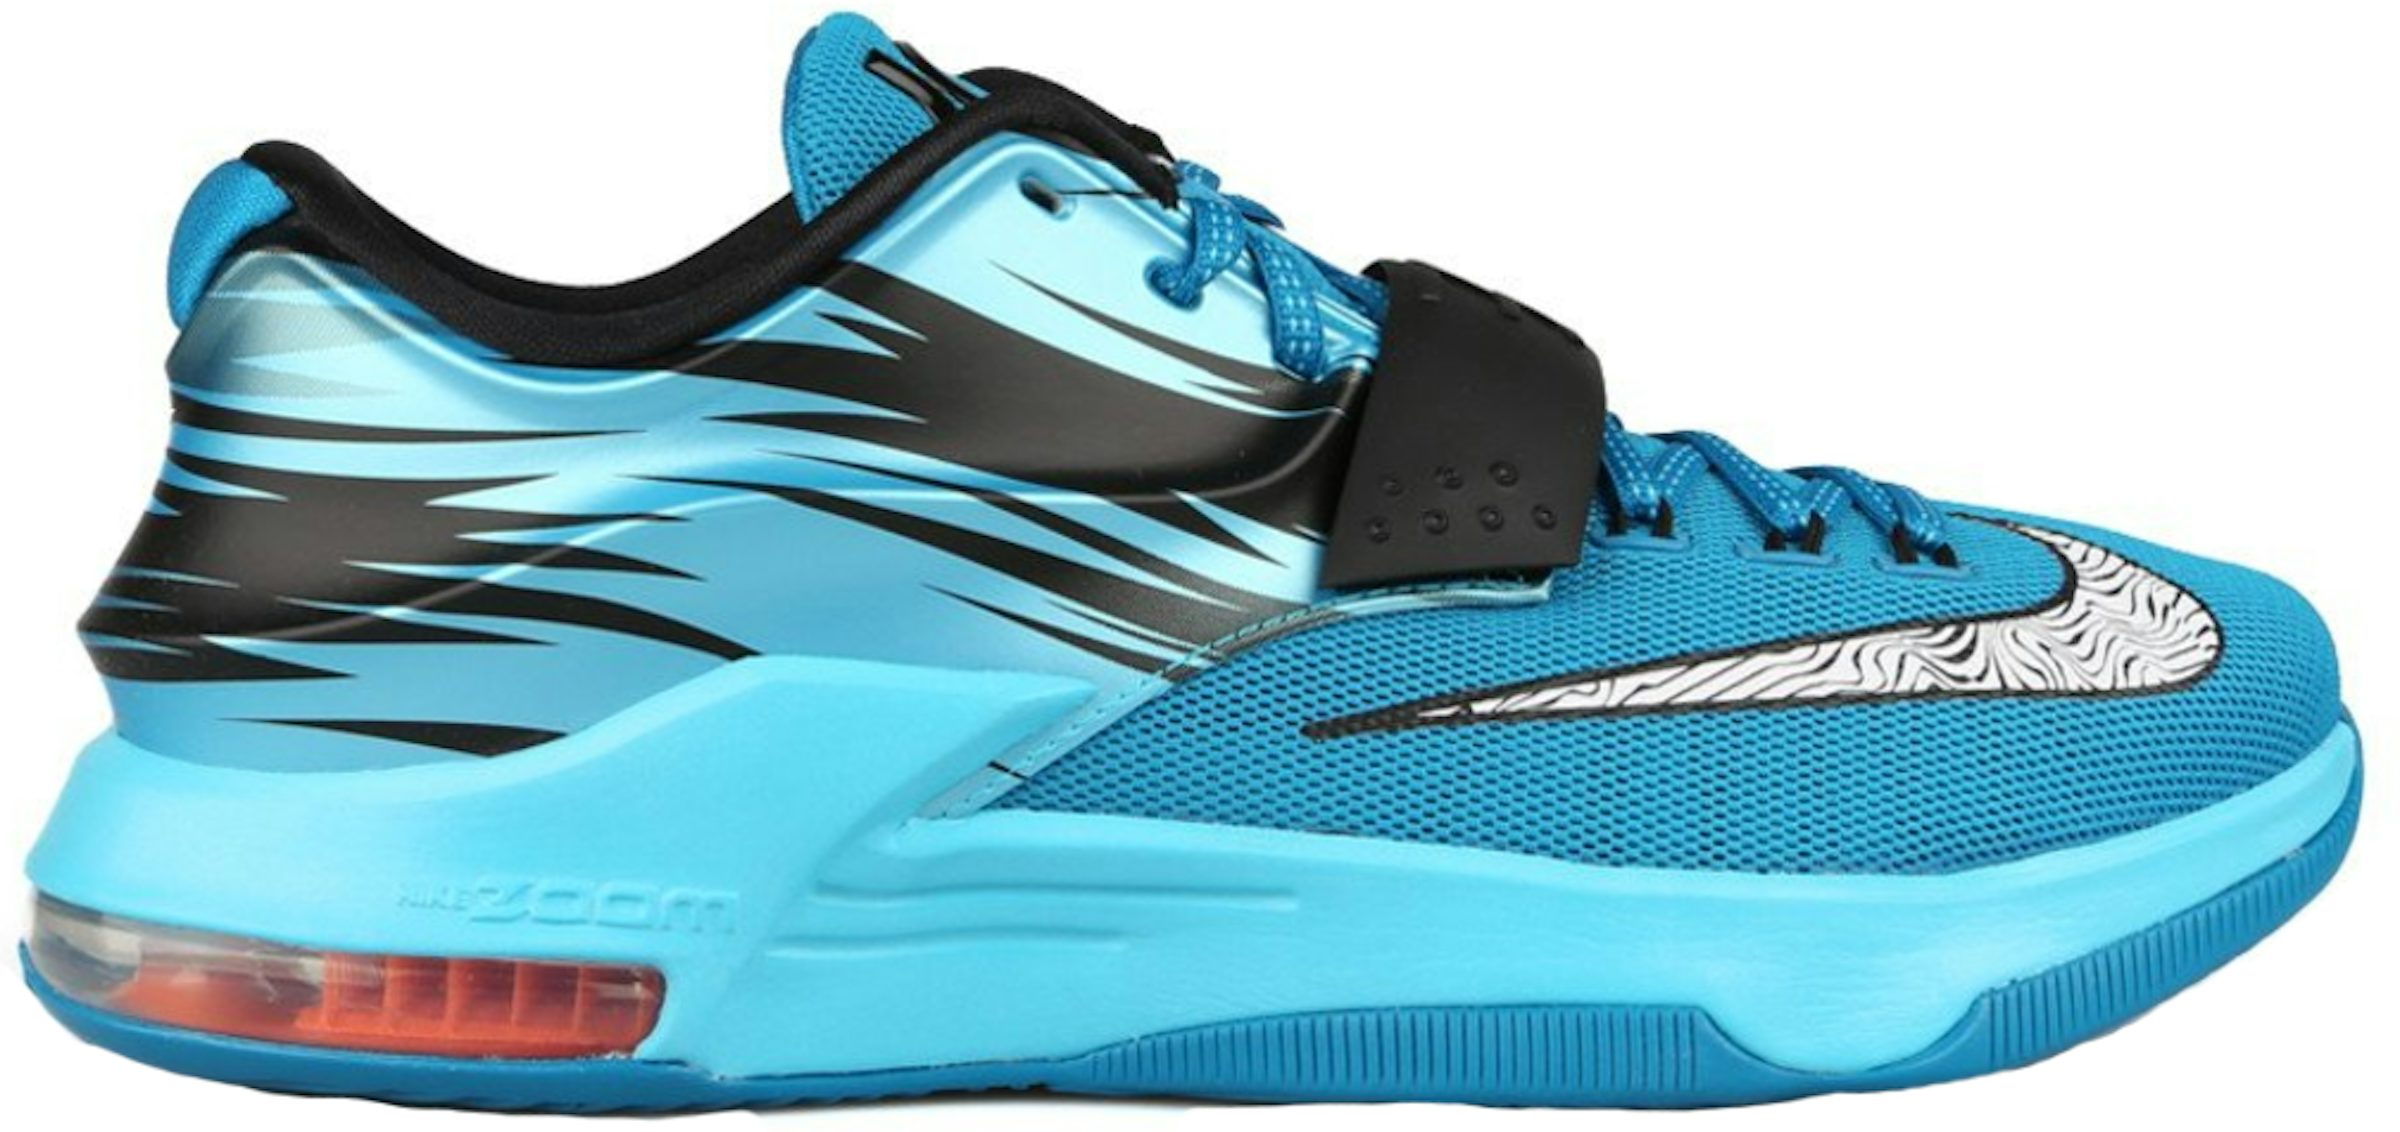 Nike KD 7 Clearwater / Blue Lacquer Review 